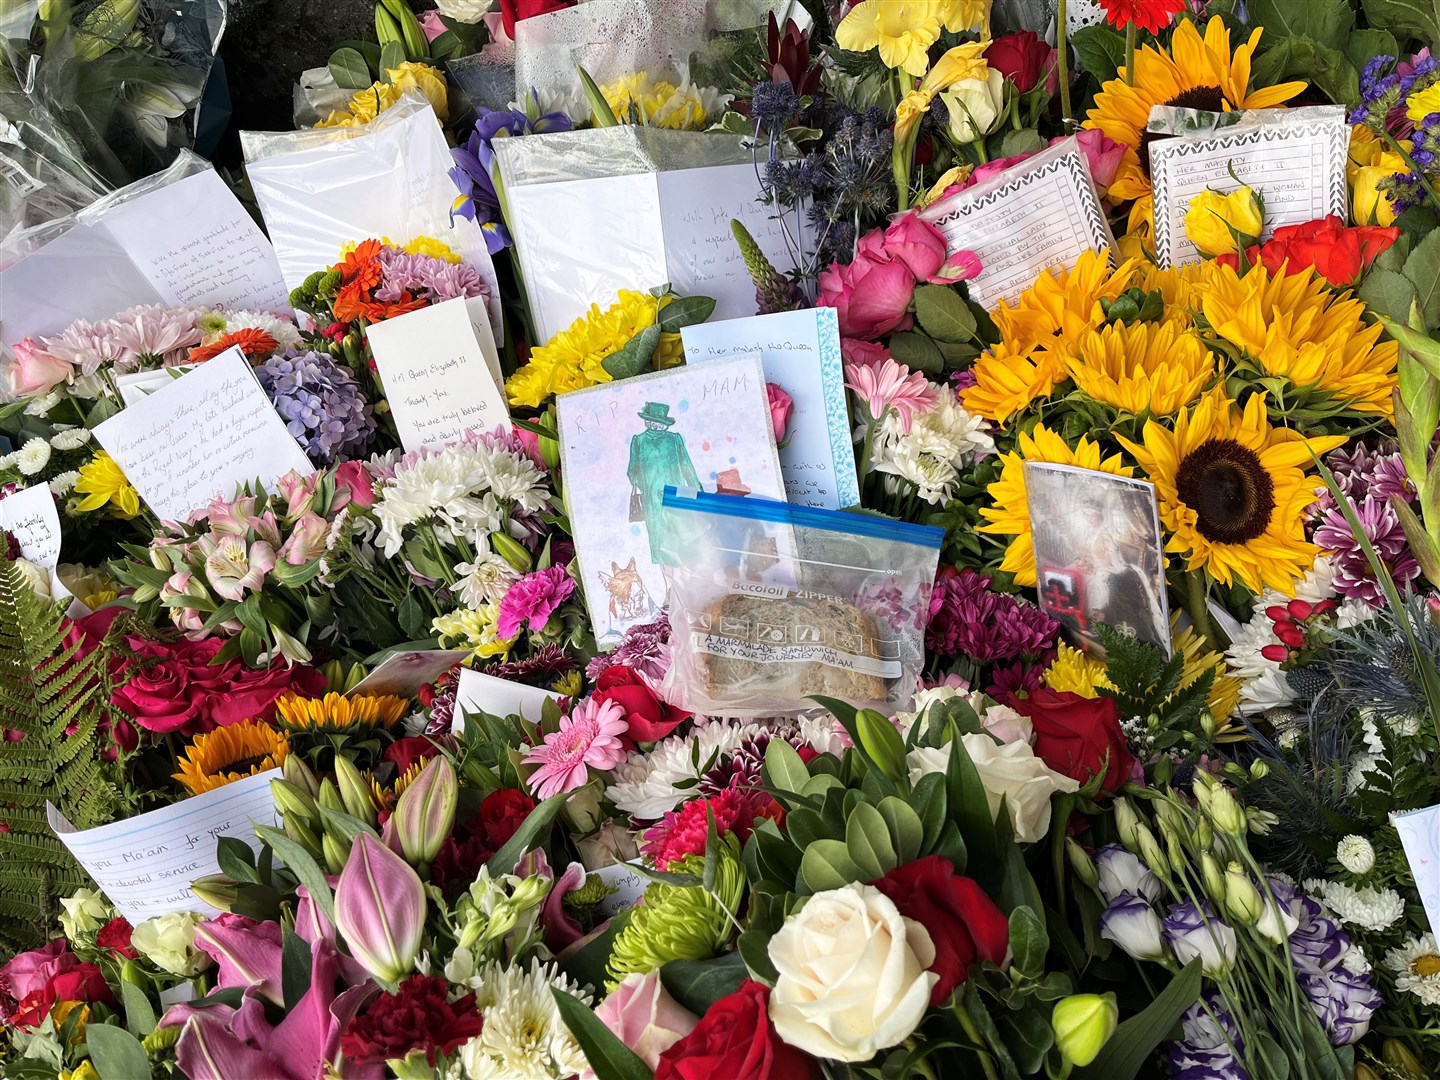 A marmalade sandwich among the flowers laid by members of the public (Aine Fox/PA)